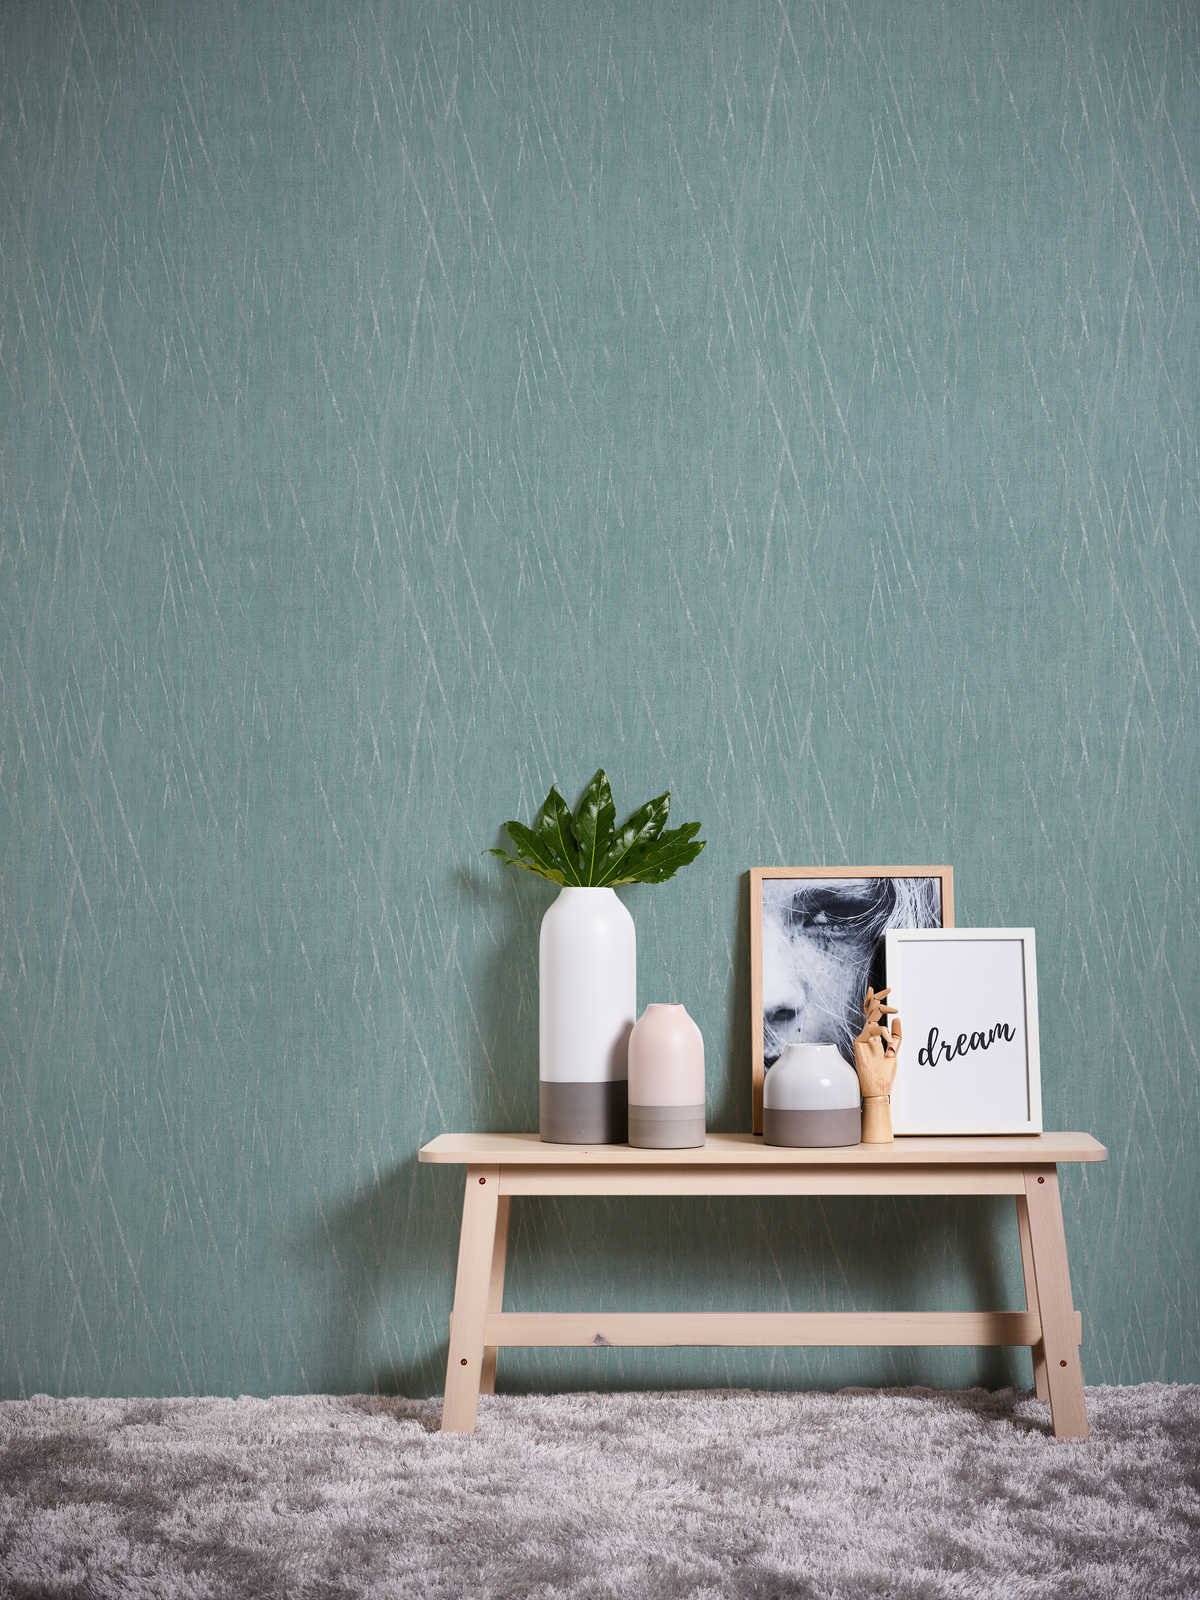             Textured wallpaper with metallic colours - blue, green, silver
        